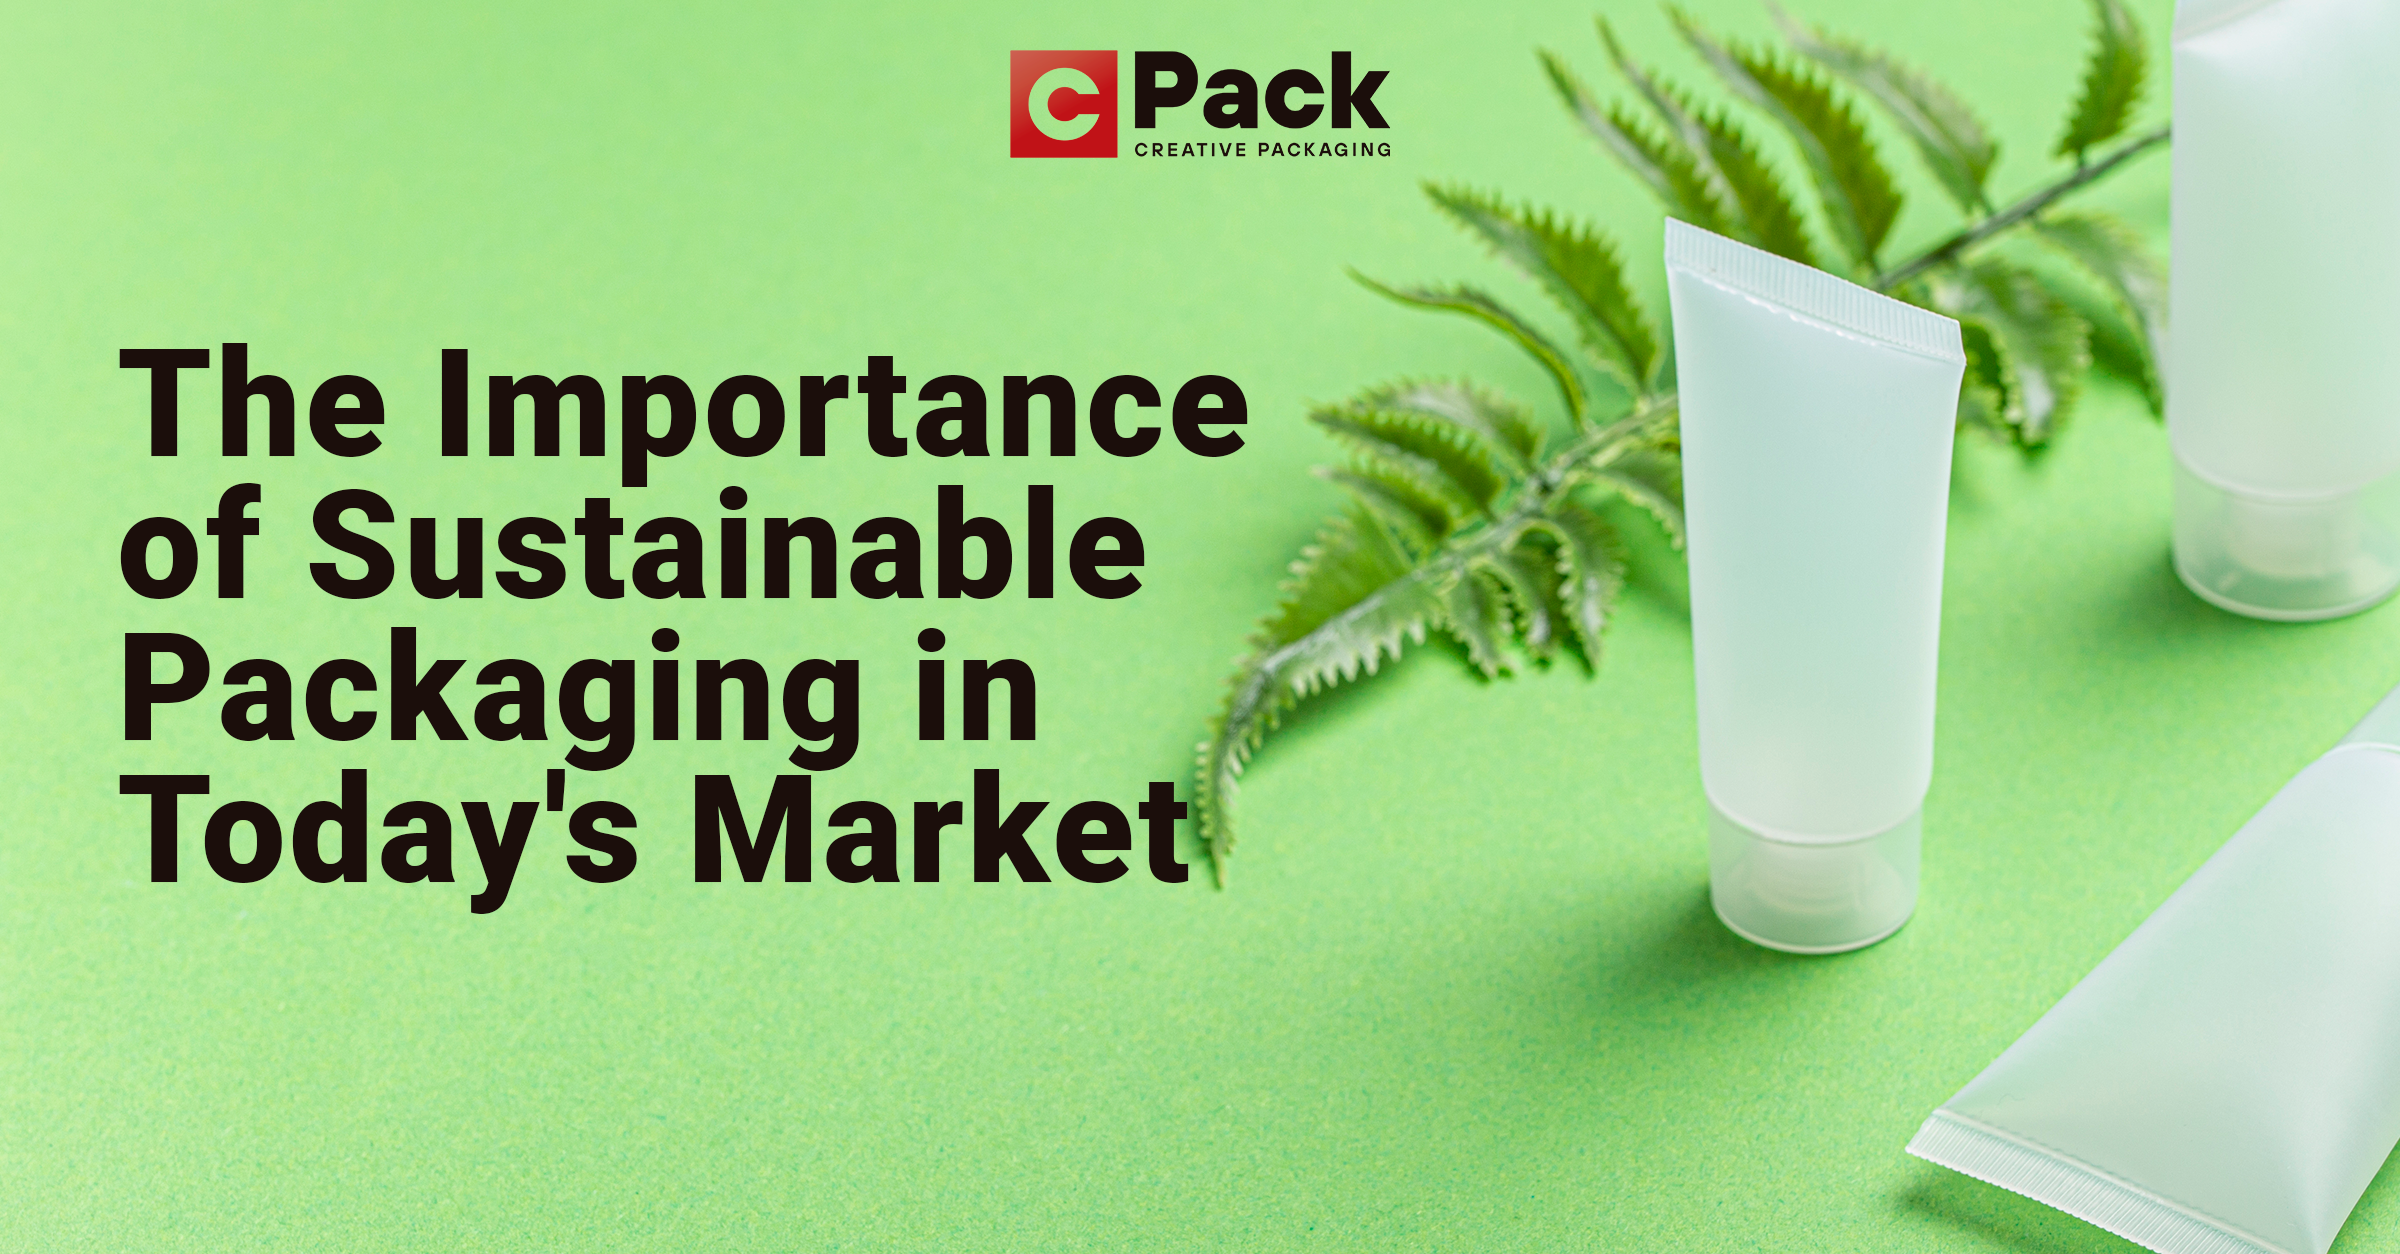 Text displaying "The Importance of Sustainable Packaging in Today's Market"